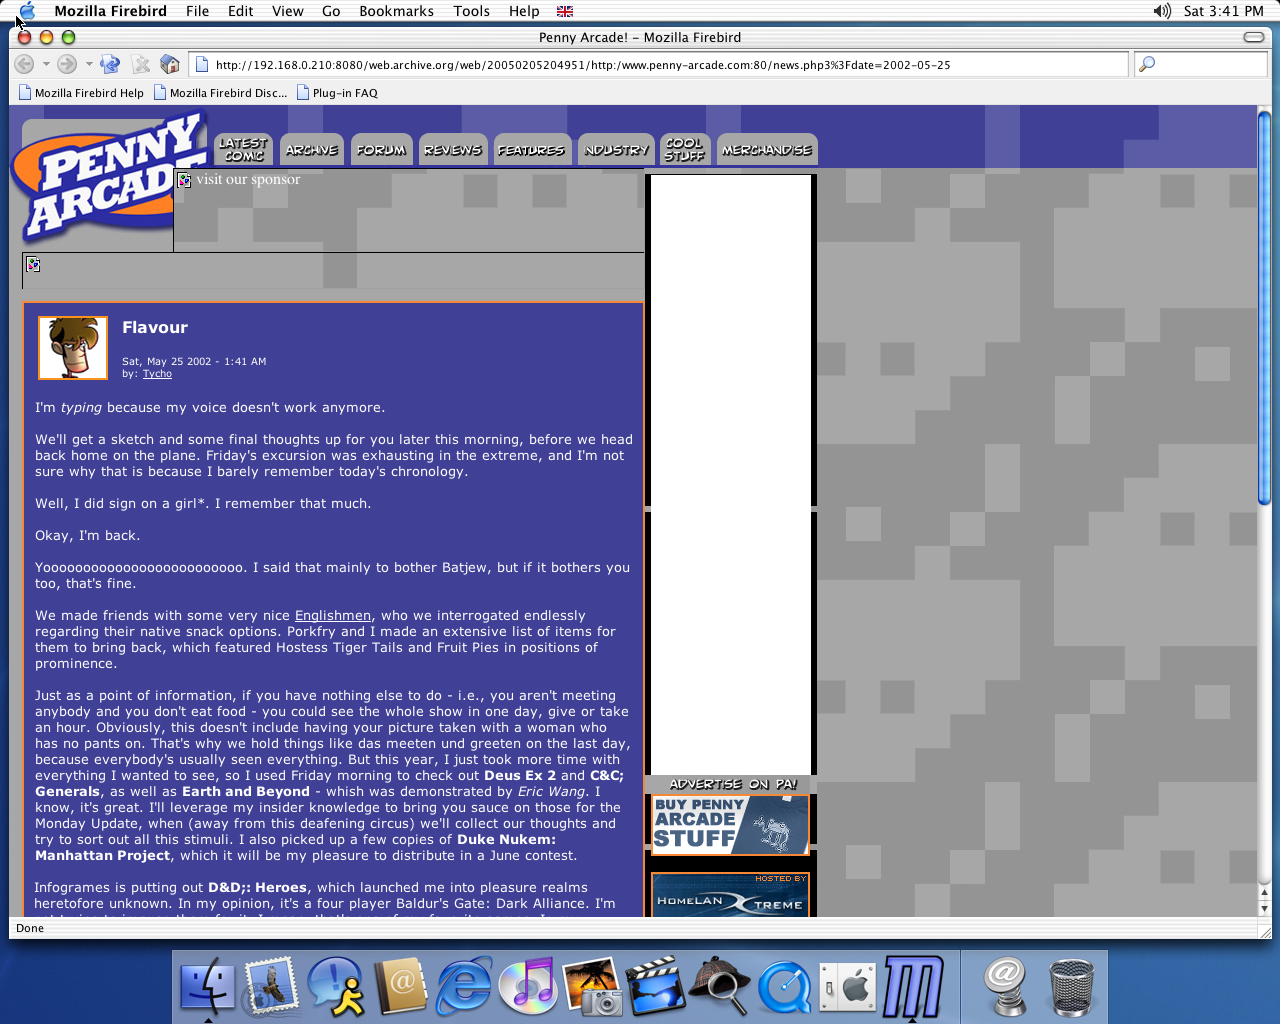 OS X 10.2 PPC with Firebird 0.6 displaying a page from Penny Arcade archived at February 05, 2005 at 20:49:51